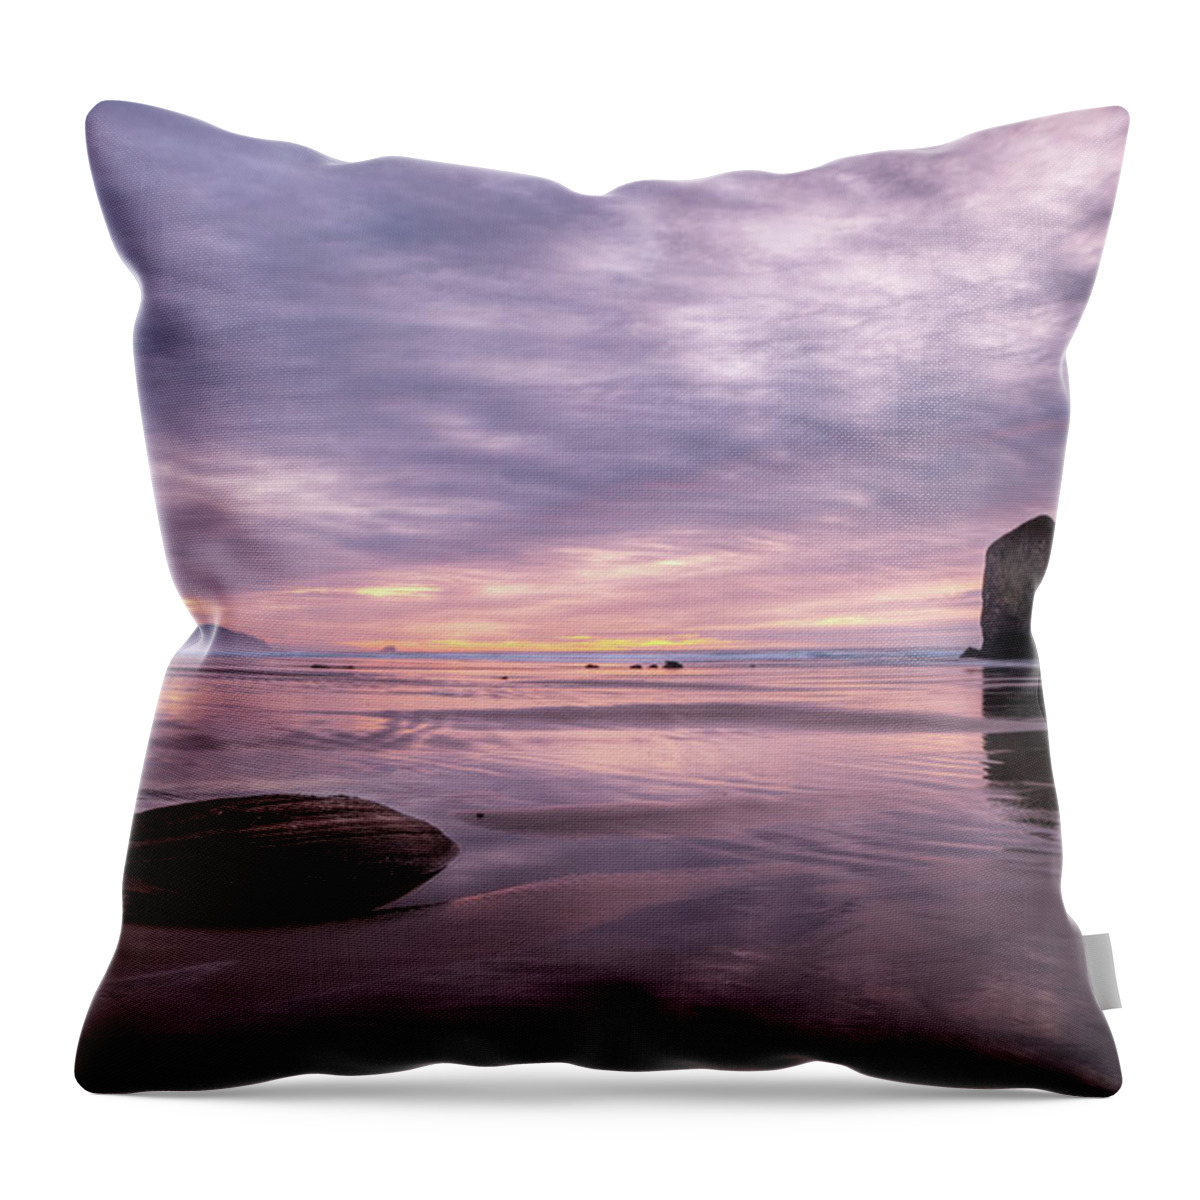 Seascape Throw Pillow featuring the photograph Pacific Ocean Sunset by Bike maverick